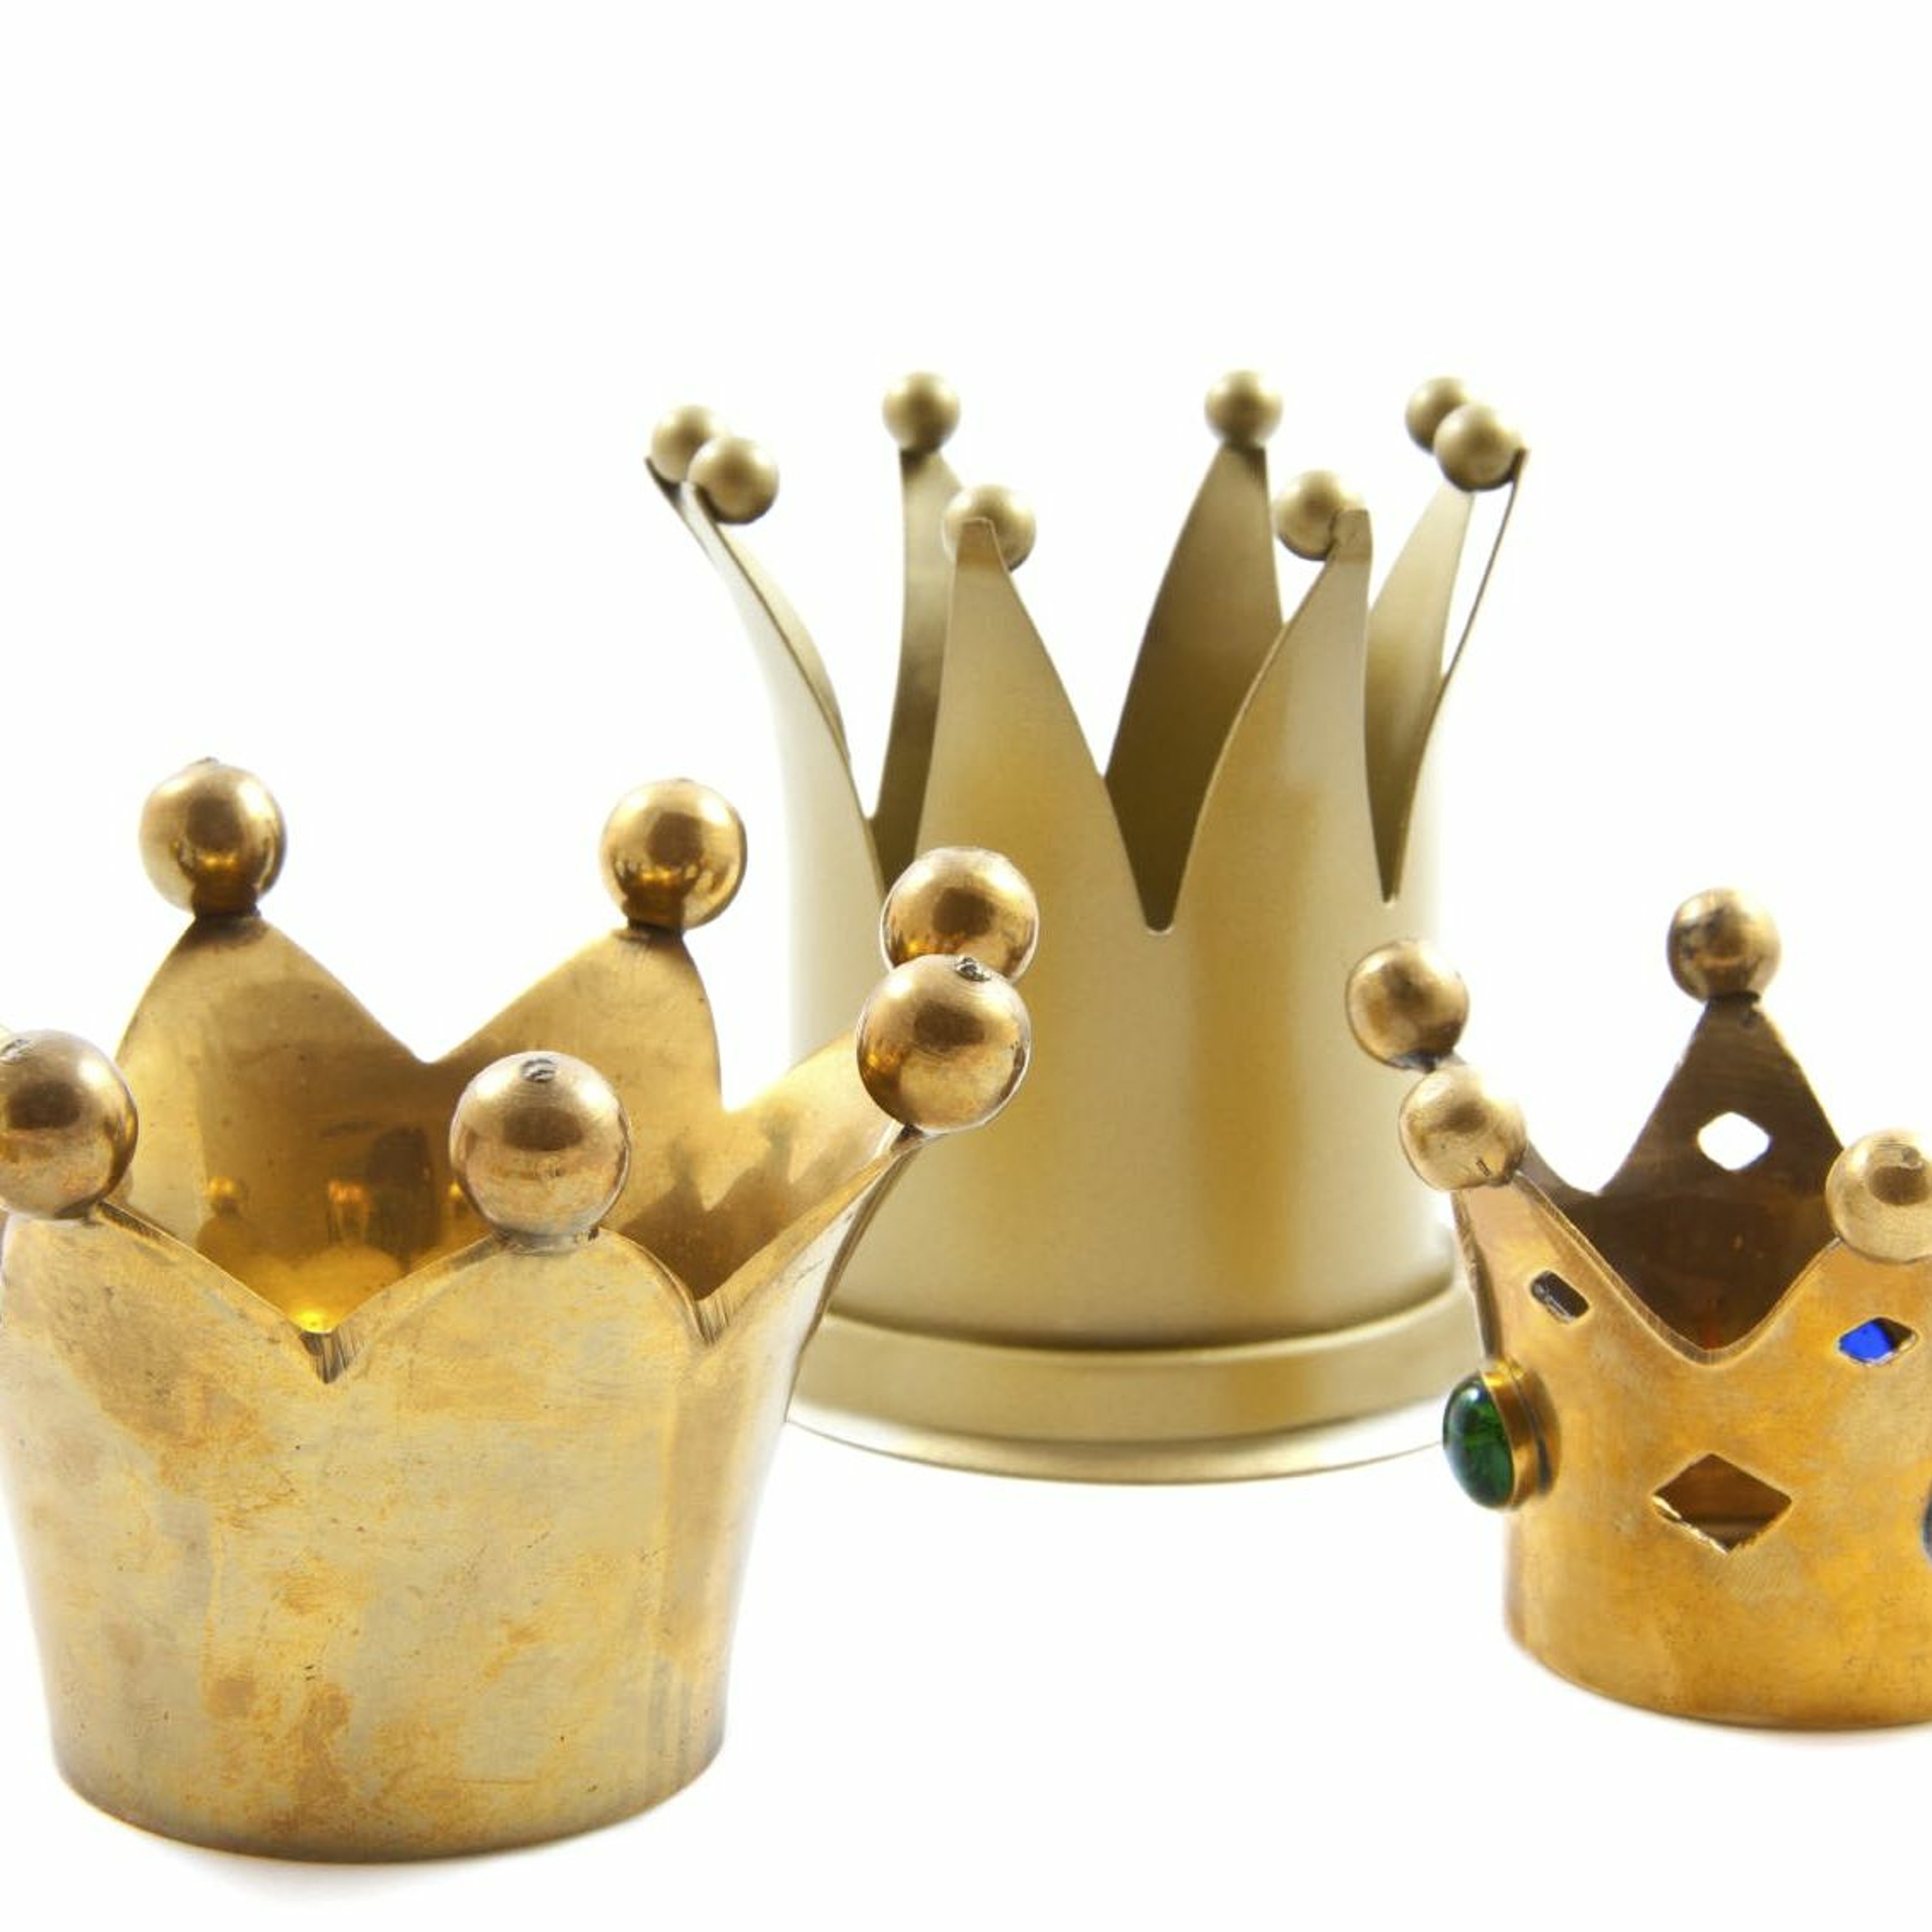 The Crown All Can Wear (Pinchas 5779)